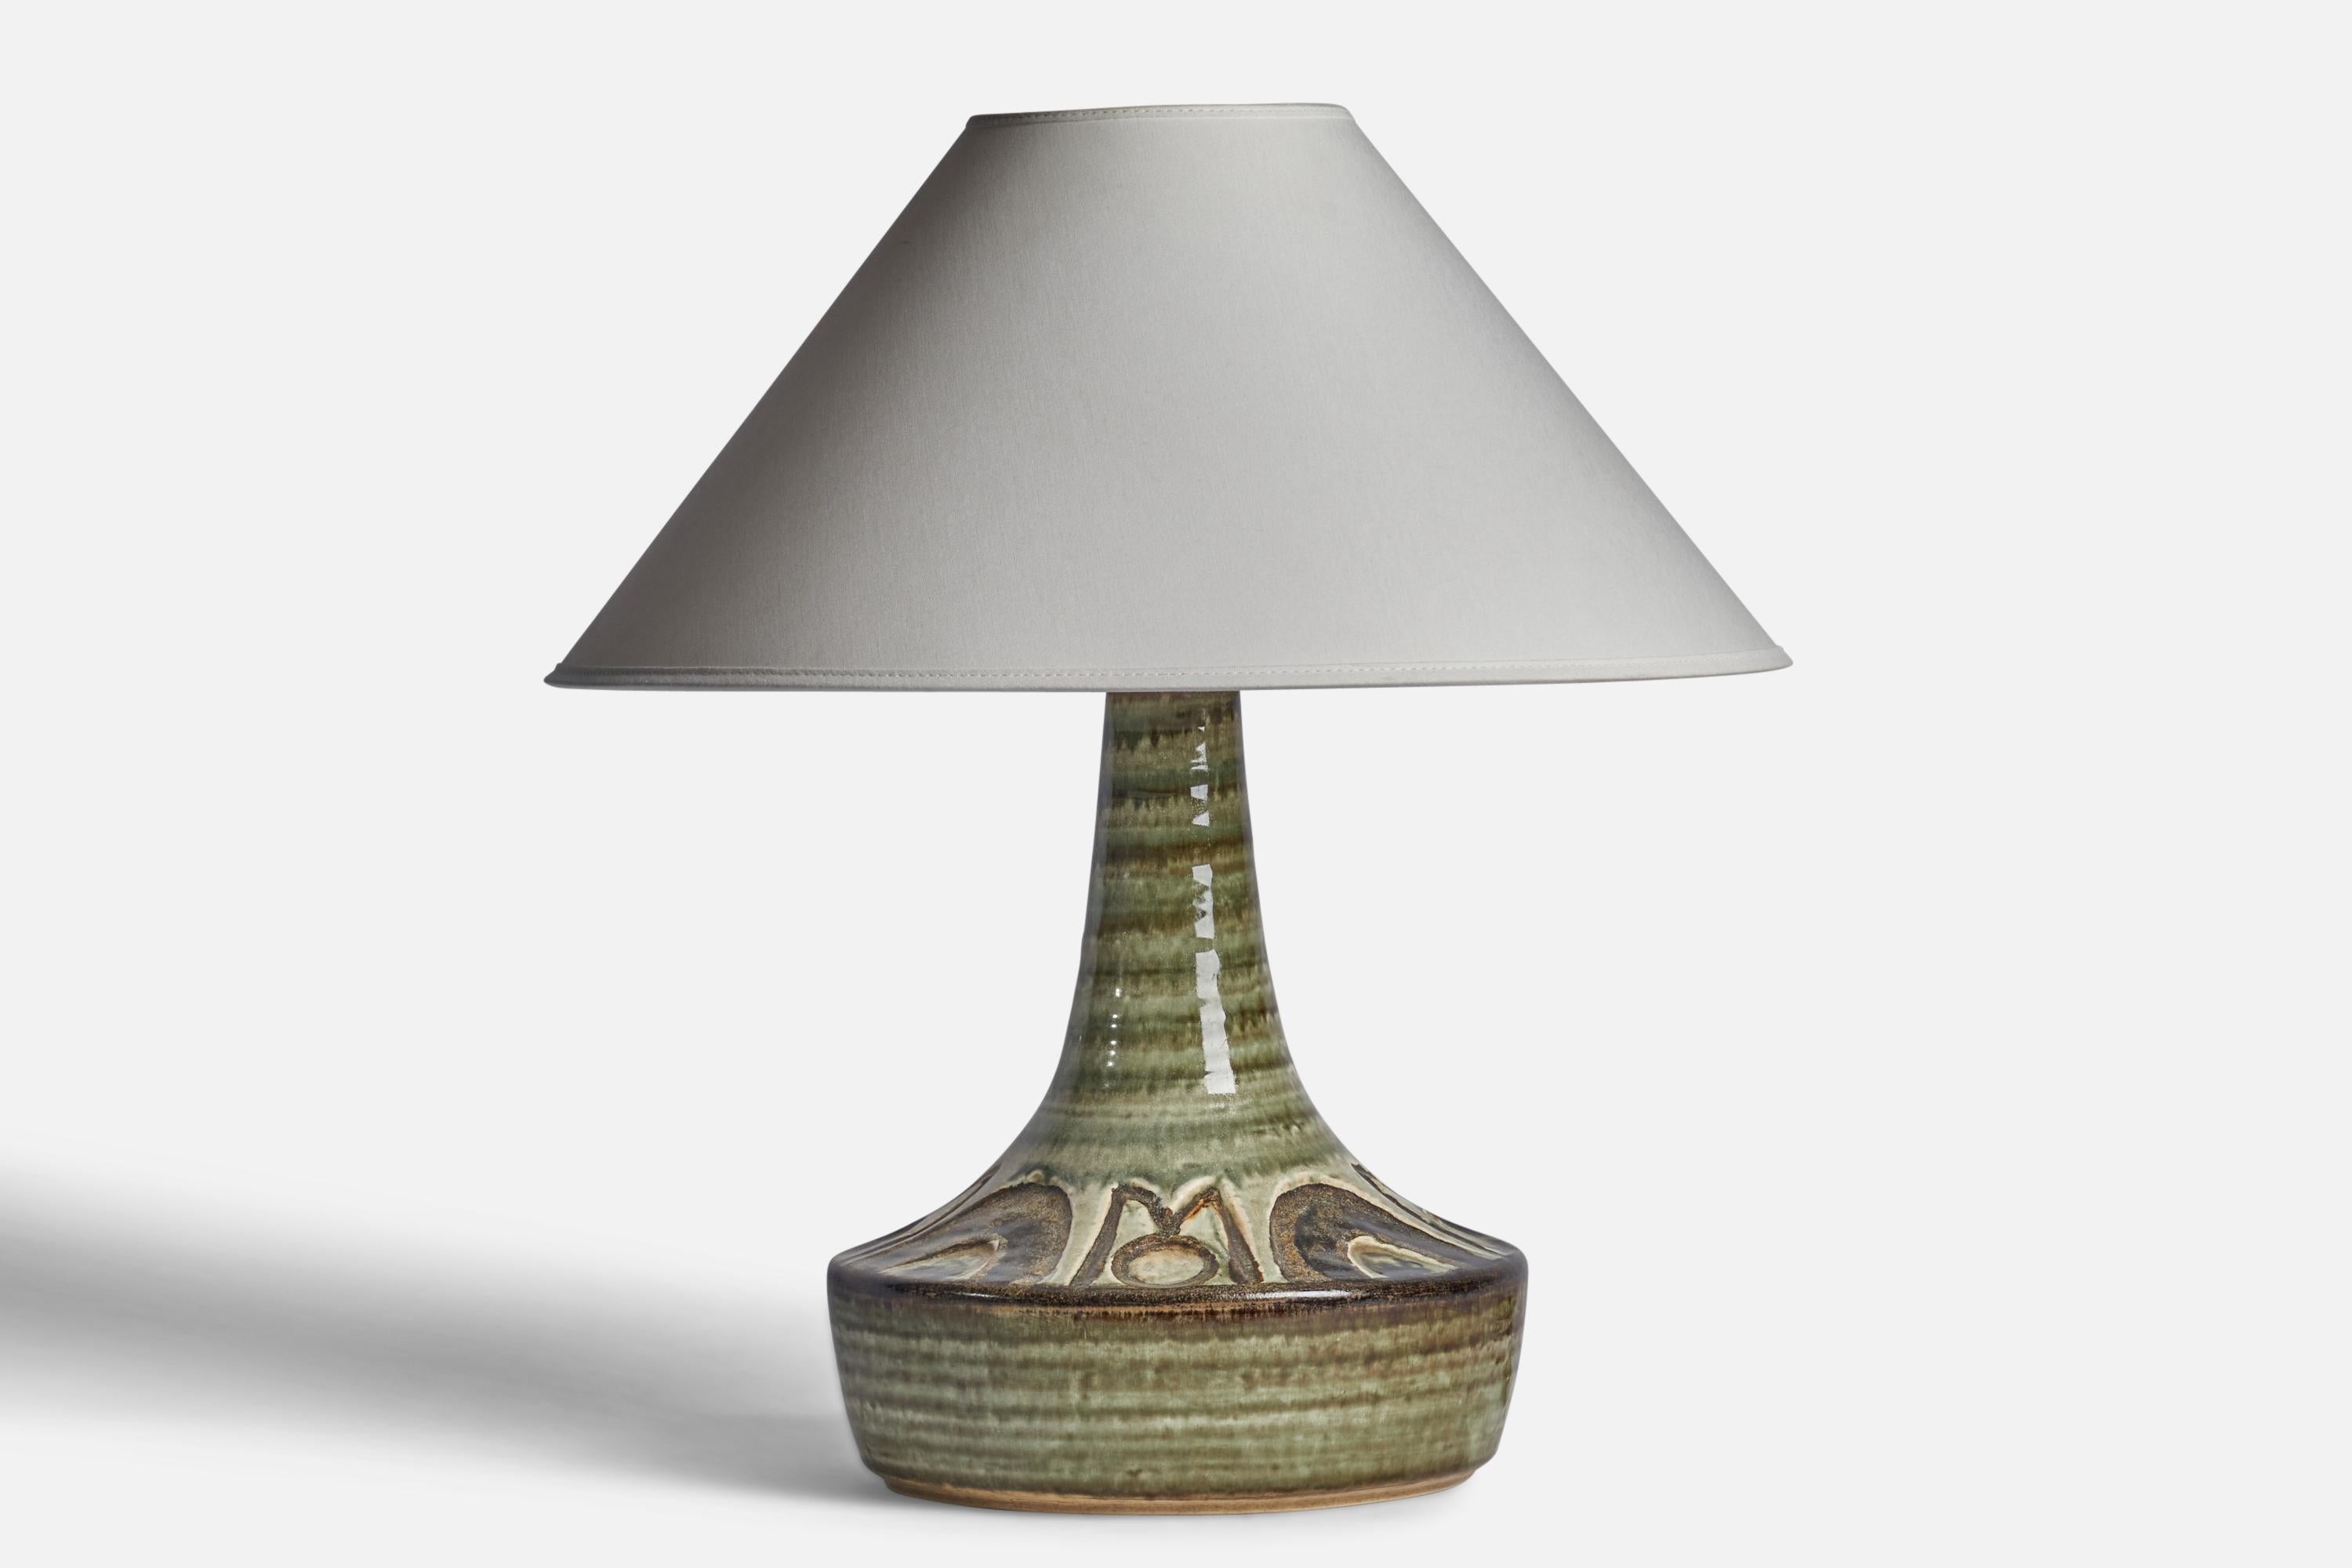 A green-glazed stoneware table lamp designed and produced in Denmark, 1960s.

Dimensions of Lamp (inches): 13.25” H x 9” Diameter
Dimensions of Shade (inches): 4.5” Top Diameter x 15.75” Bottom Diameter x 9” H
Dimensions of Lamp with Shade (inches):